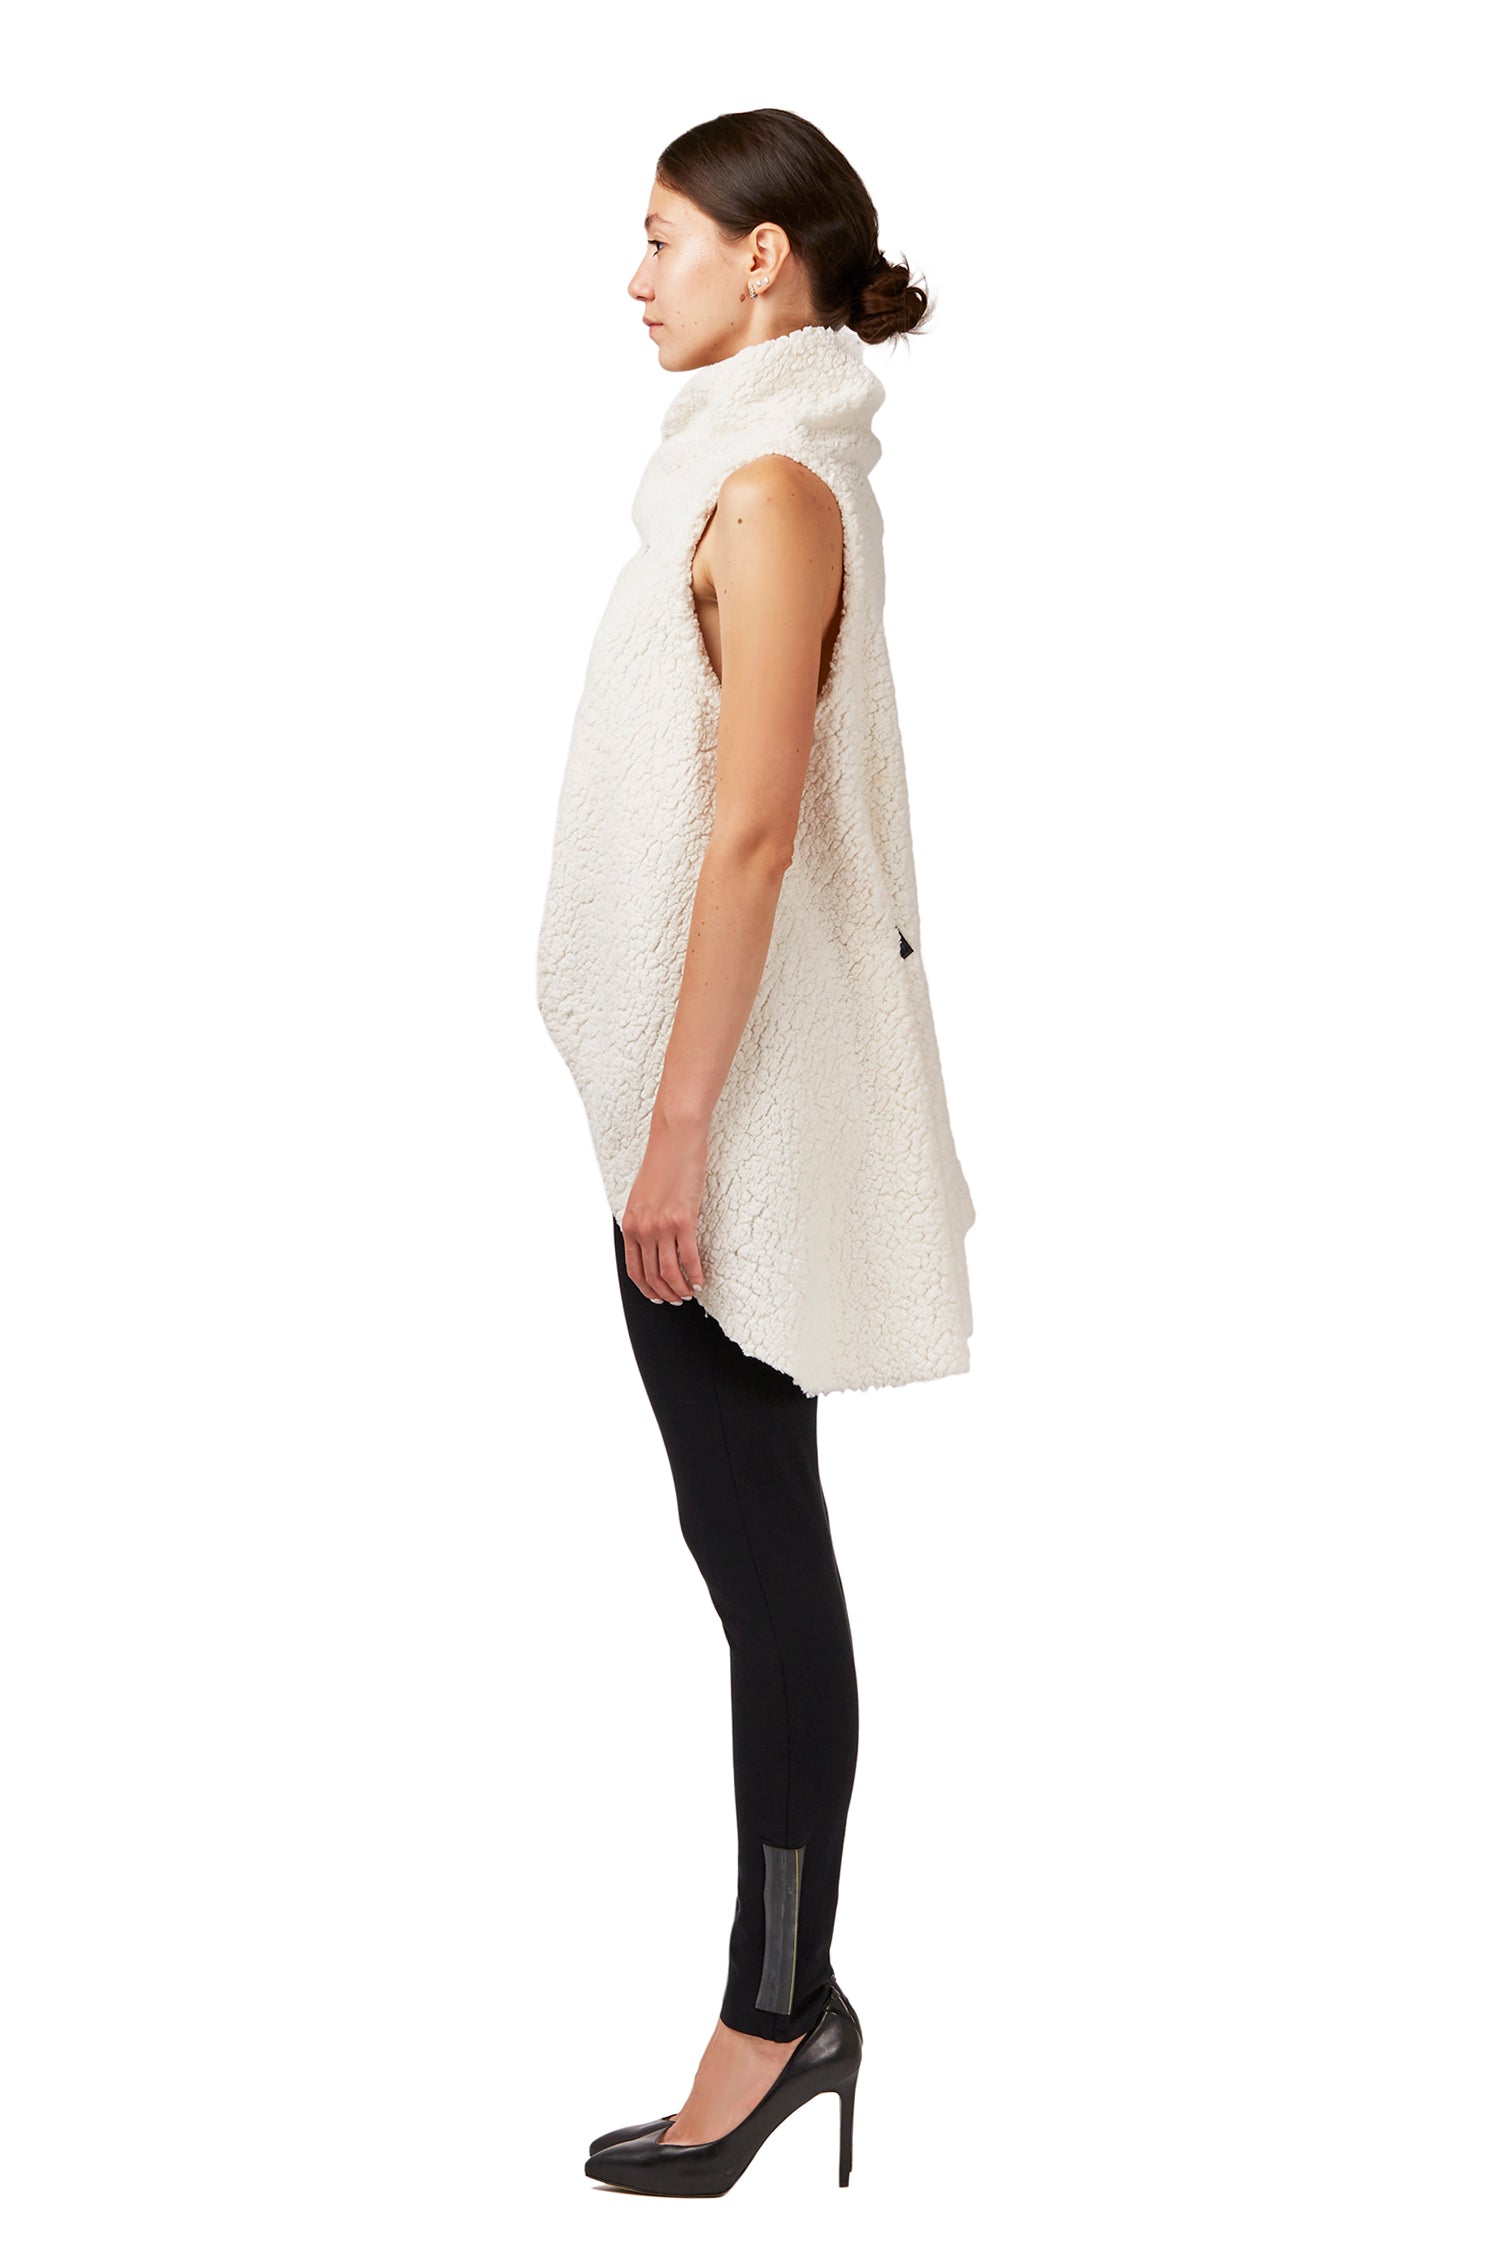 A woman standing with her side turned  wearing a white faux fur asymmetrical vest with black snaps &amp; a pair of black organic cotton leggings by Malaika New York